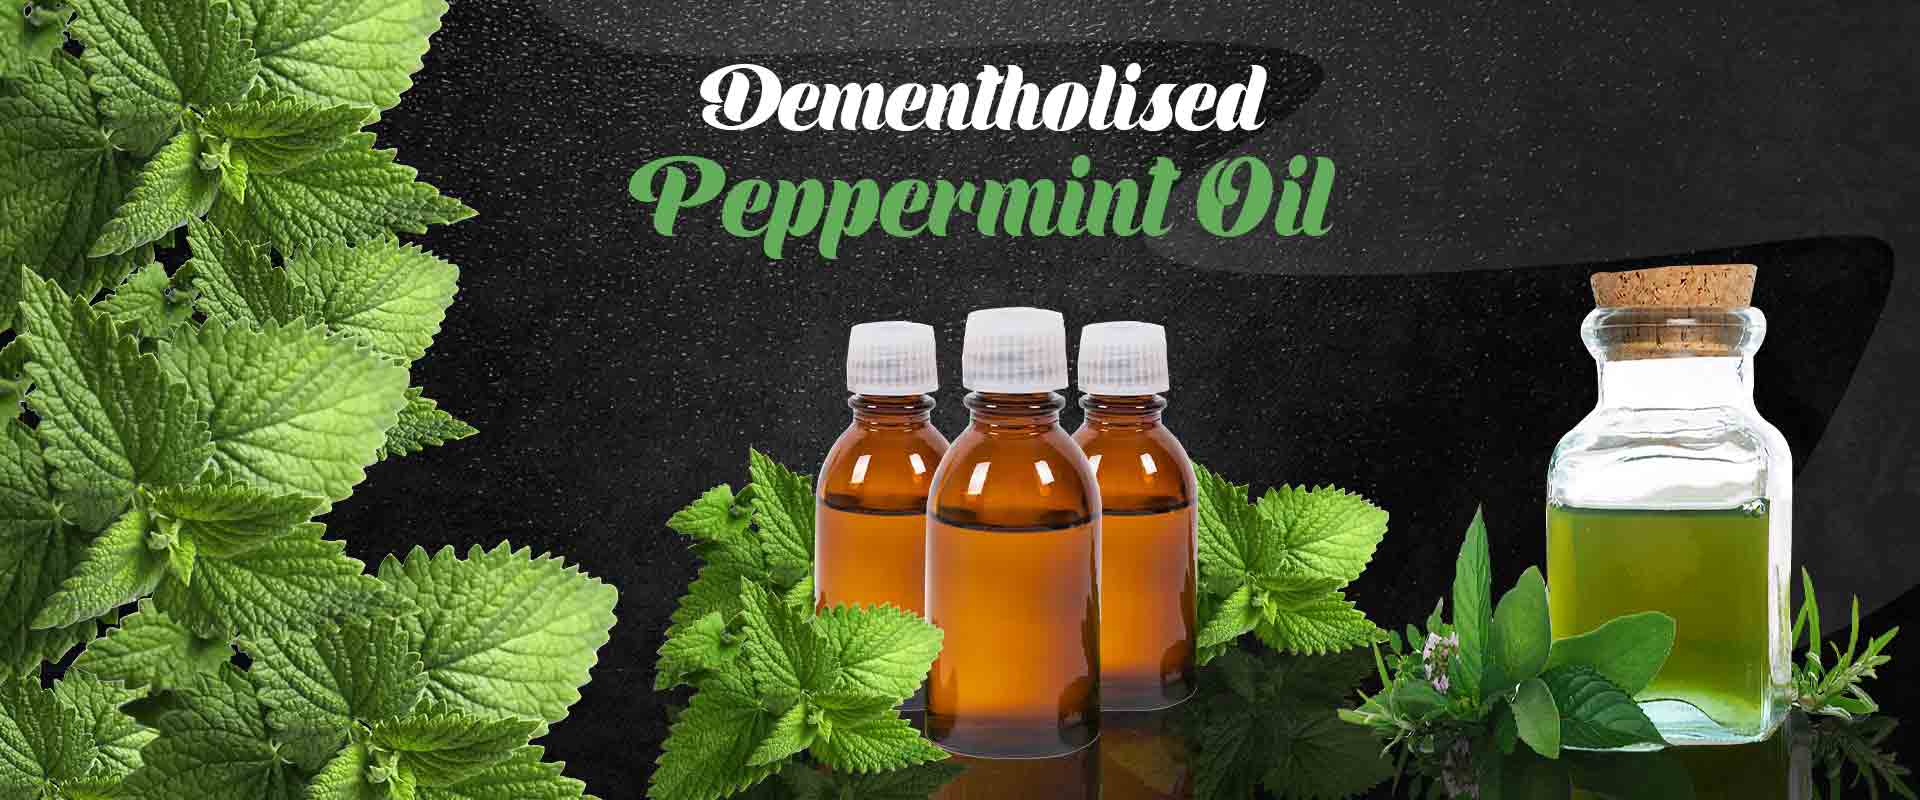 Dementholised Peppermint Oil Manufacturers